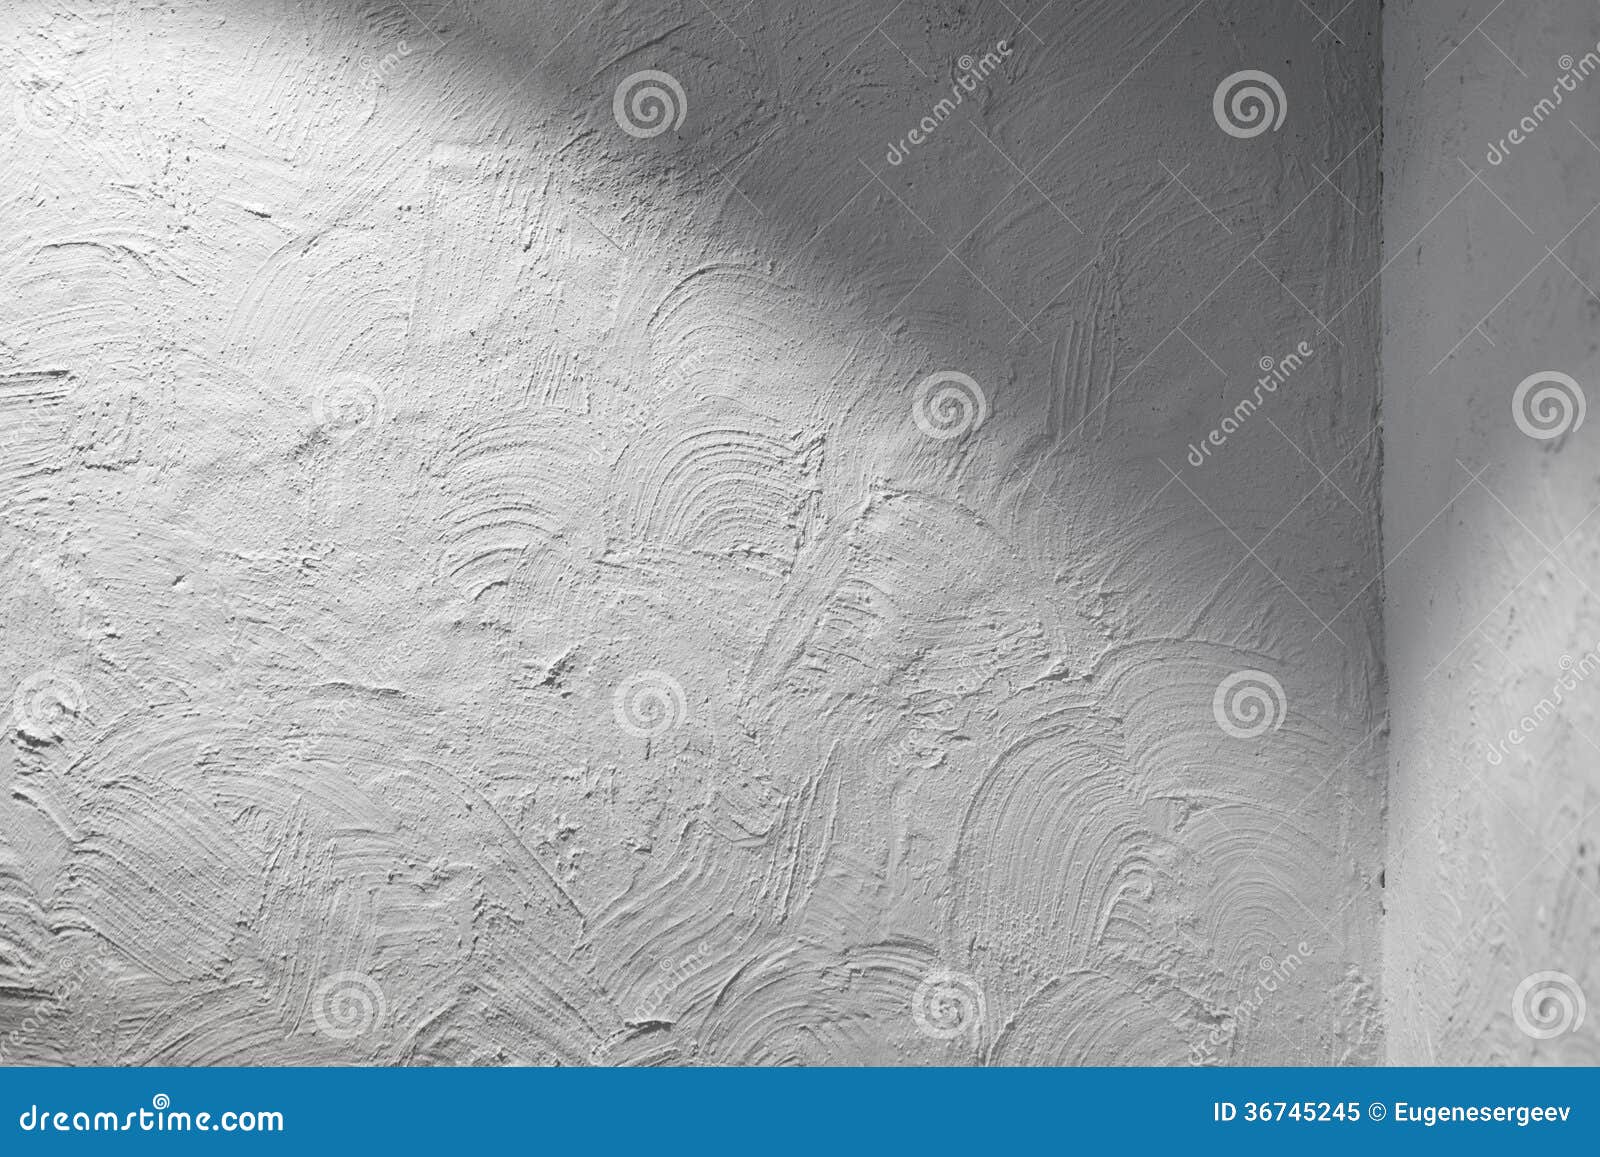 Corner Of Walls With White Stucco Stock Image Image Of